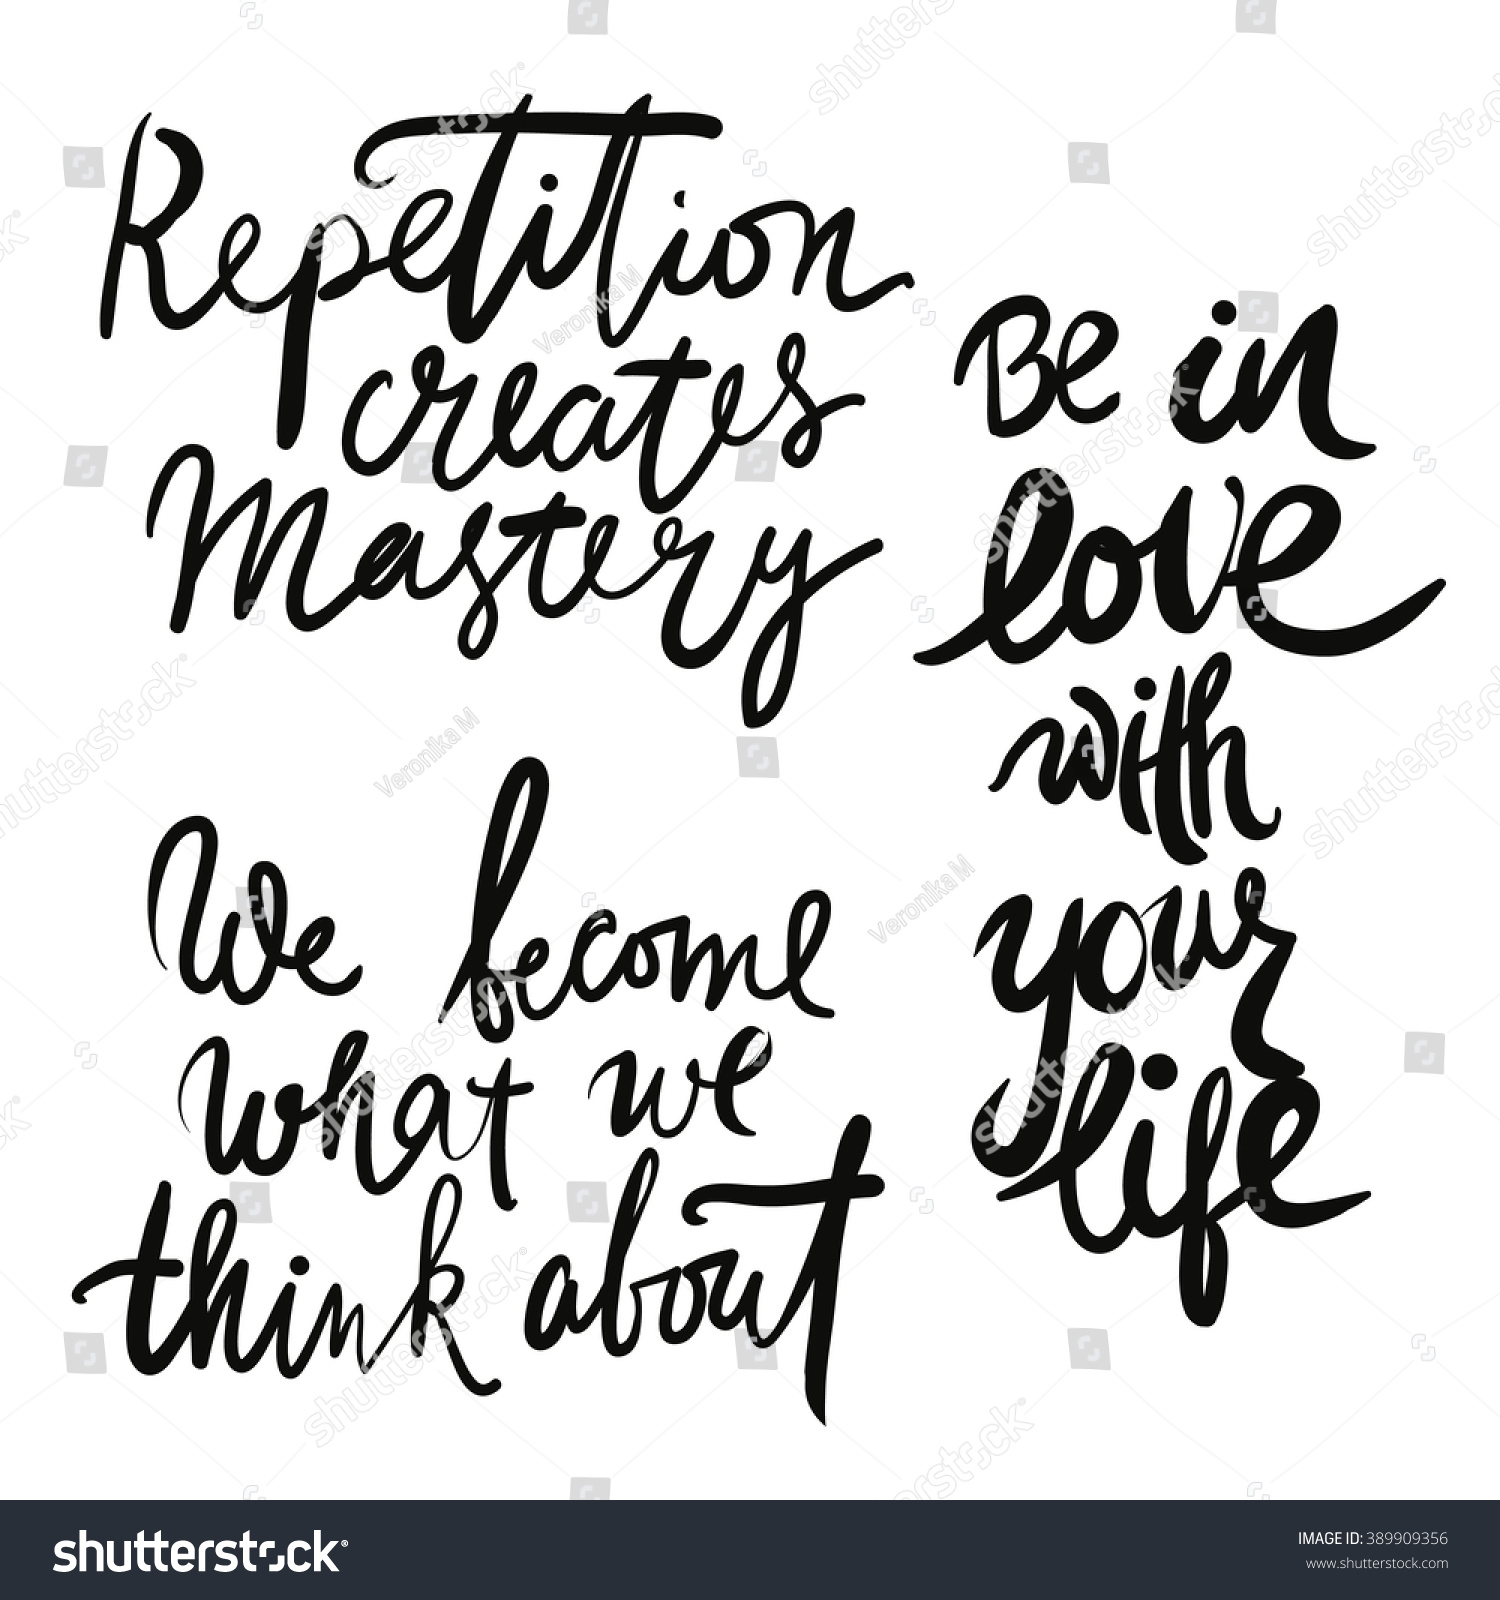 Set of hand lettering motivational quotes Repetition creates mastery We be e what we think